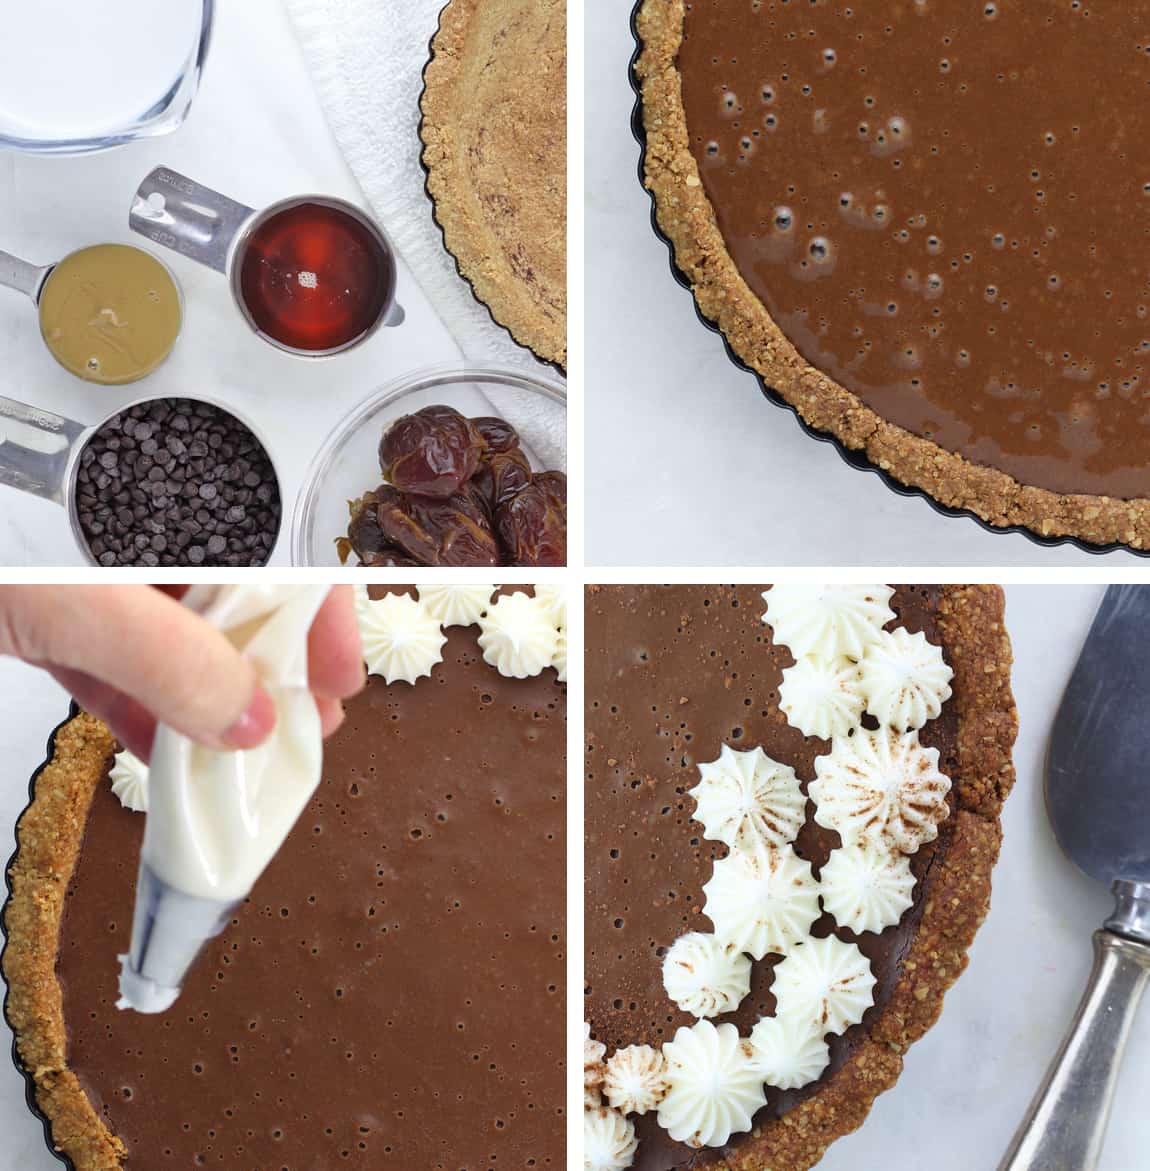 Steps to make filling for healthy chocolate cream pie.